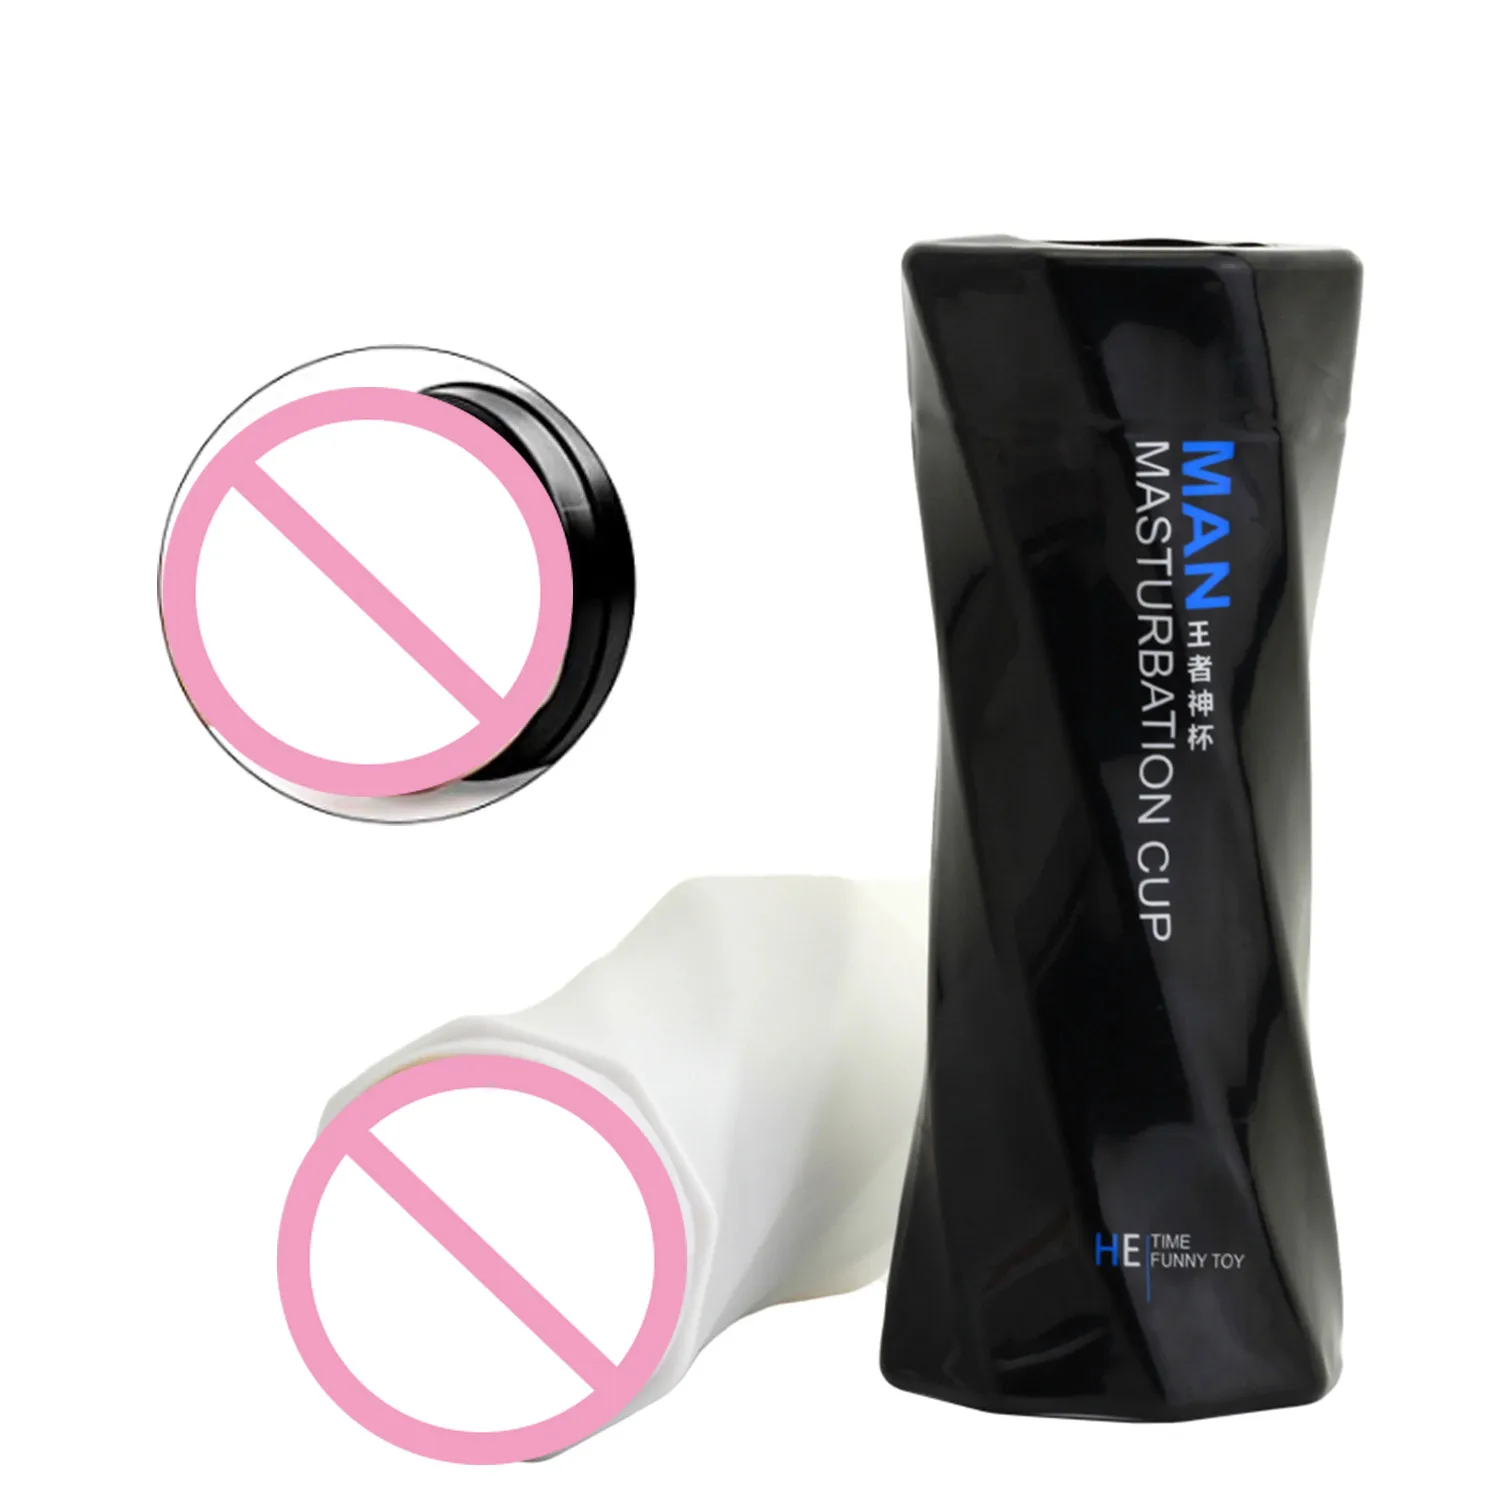 Wholesale Male Masturbation Aircraft Cup Homemade Masturbator Sex Toys Men Pussy Sex Toys For Men From m.alibaba image